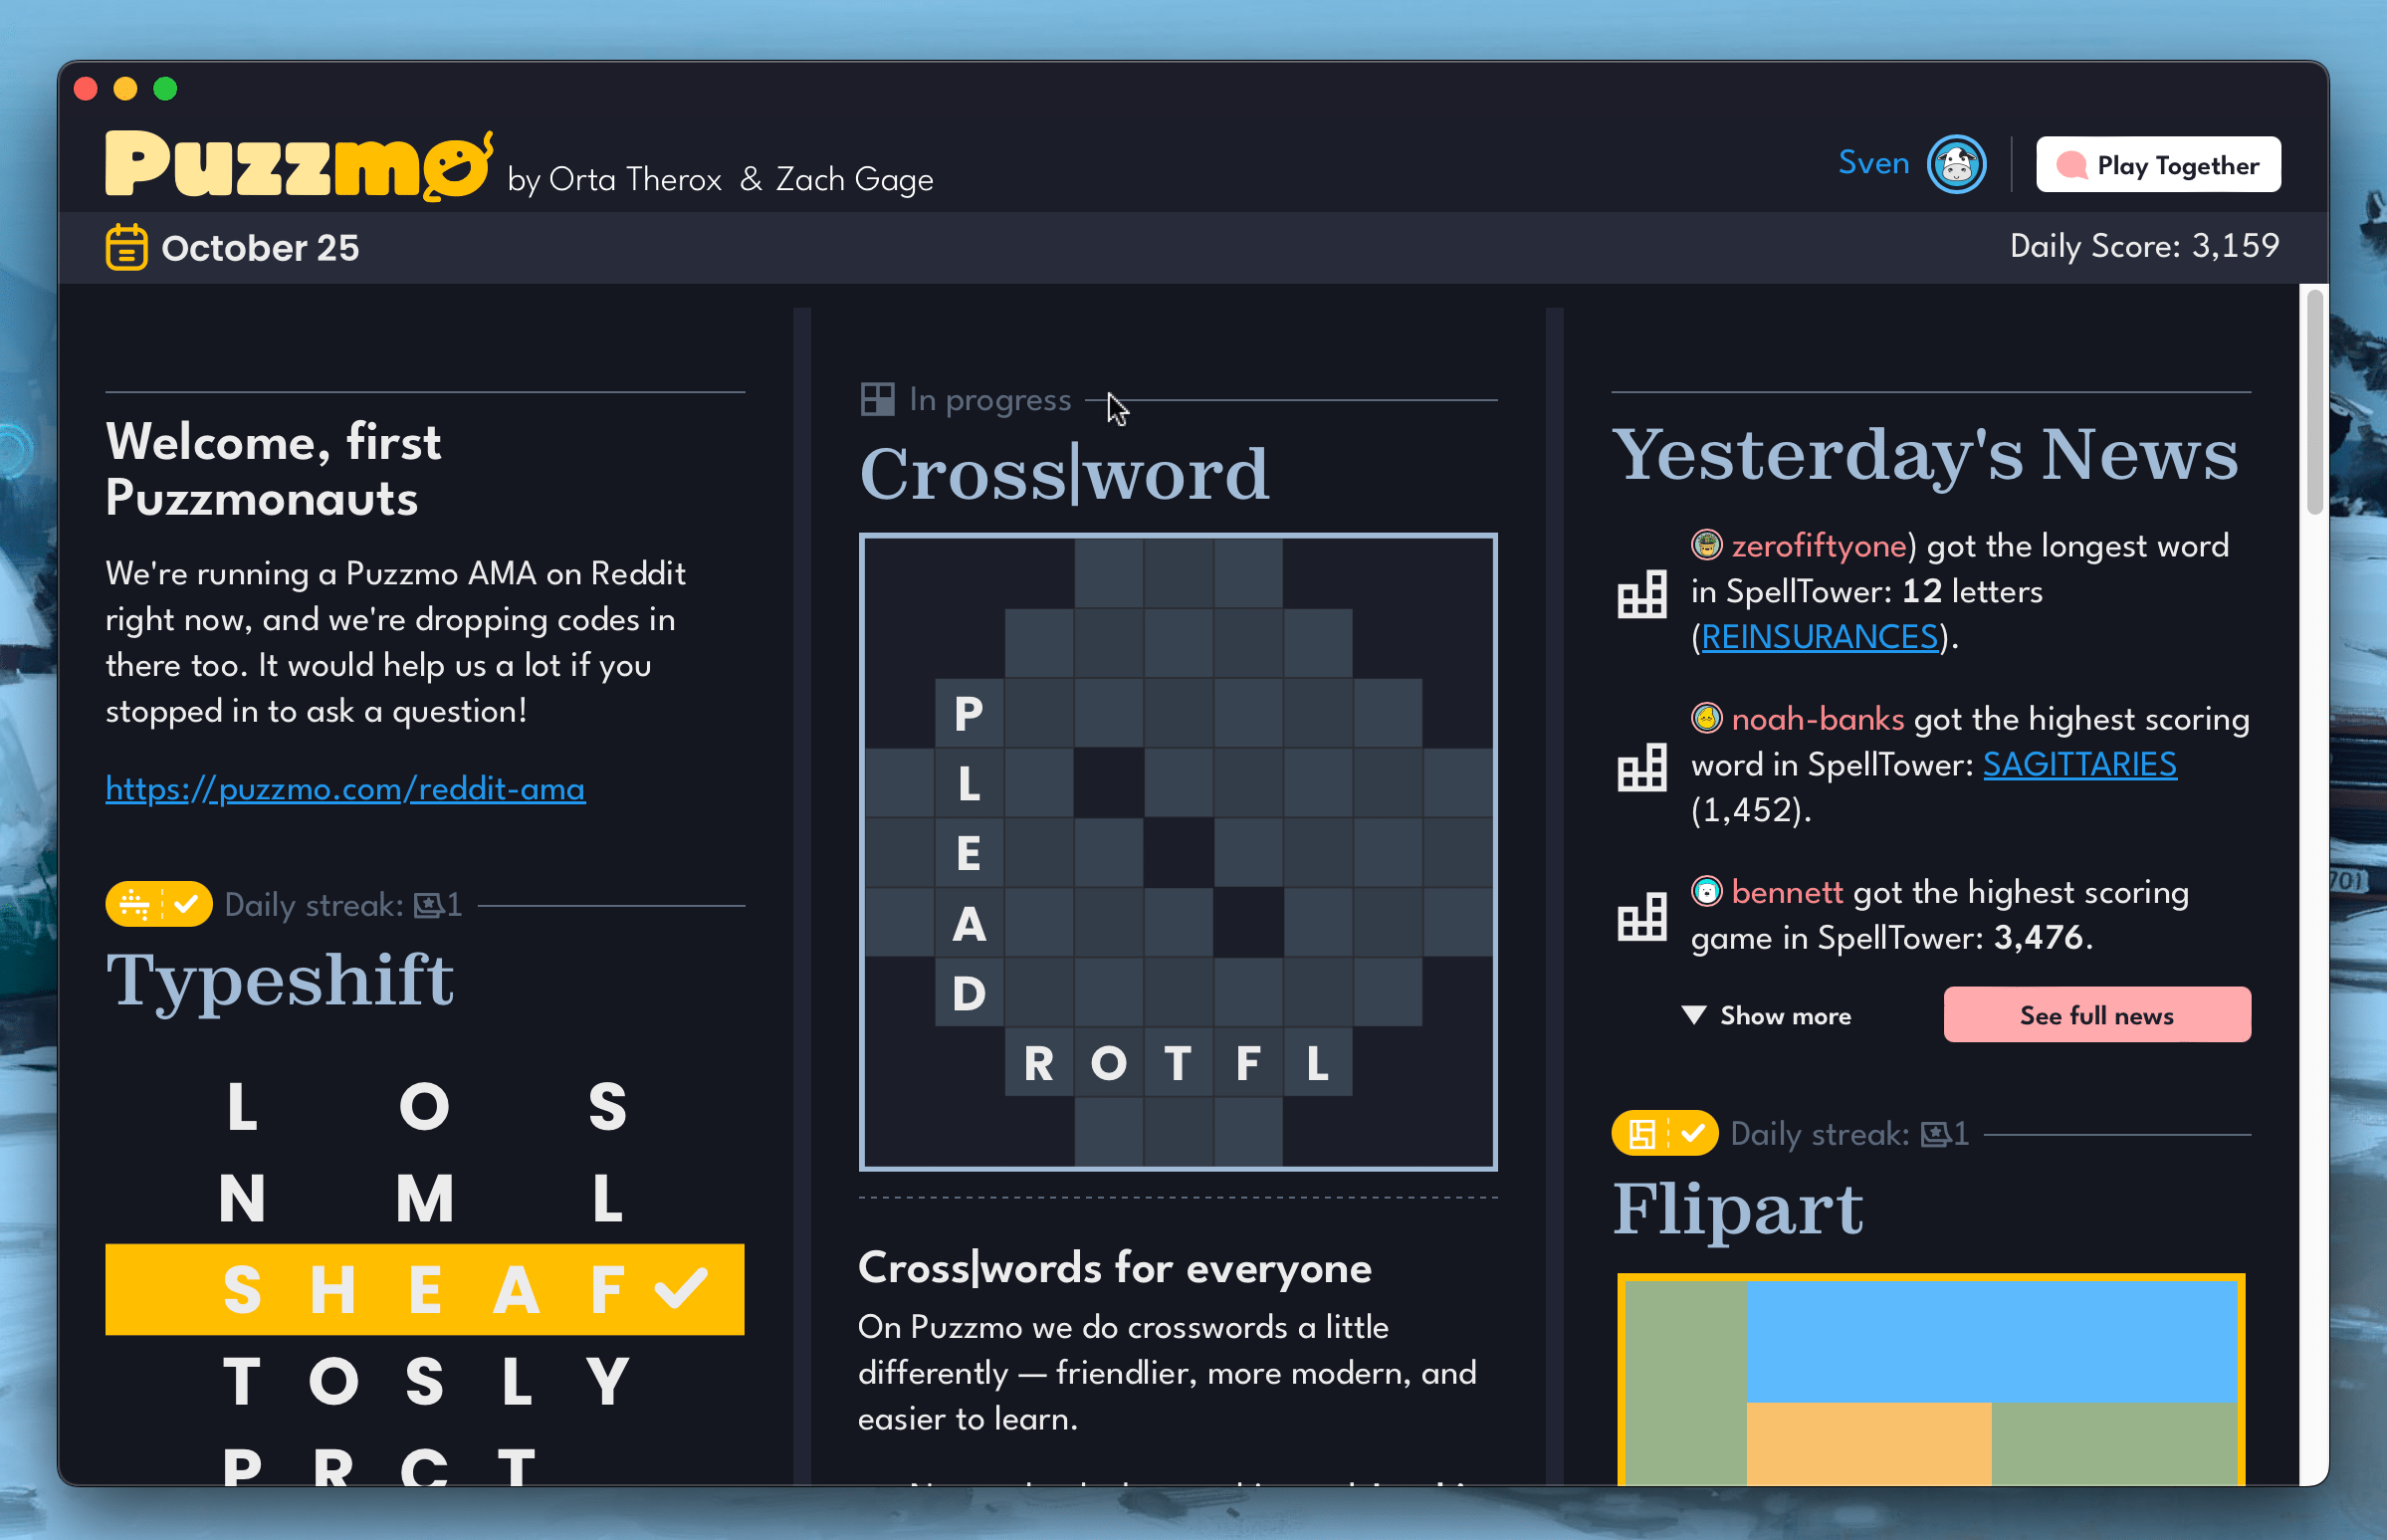 Puzzmo installed as a web app on macOS. A welcome page is shown with a preview of three types of games: CrossWord, Typeshift, and Flipart. The first two are word games, and the last one is a geometric logic puzzle. October 25 is printed on the page, it’s clear there will be new puzzles daily.